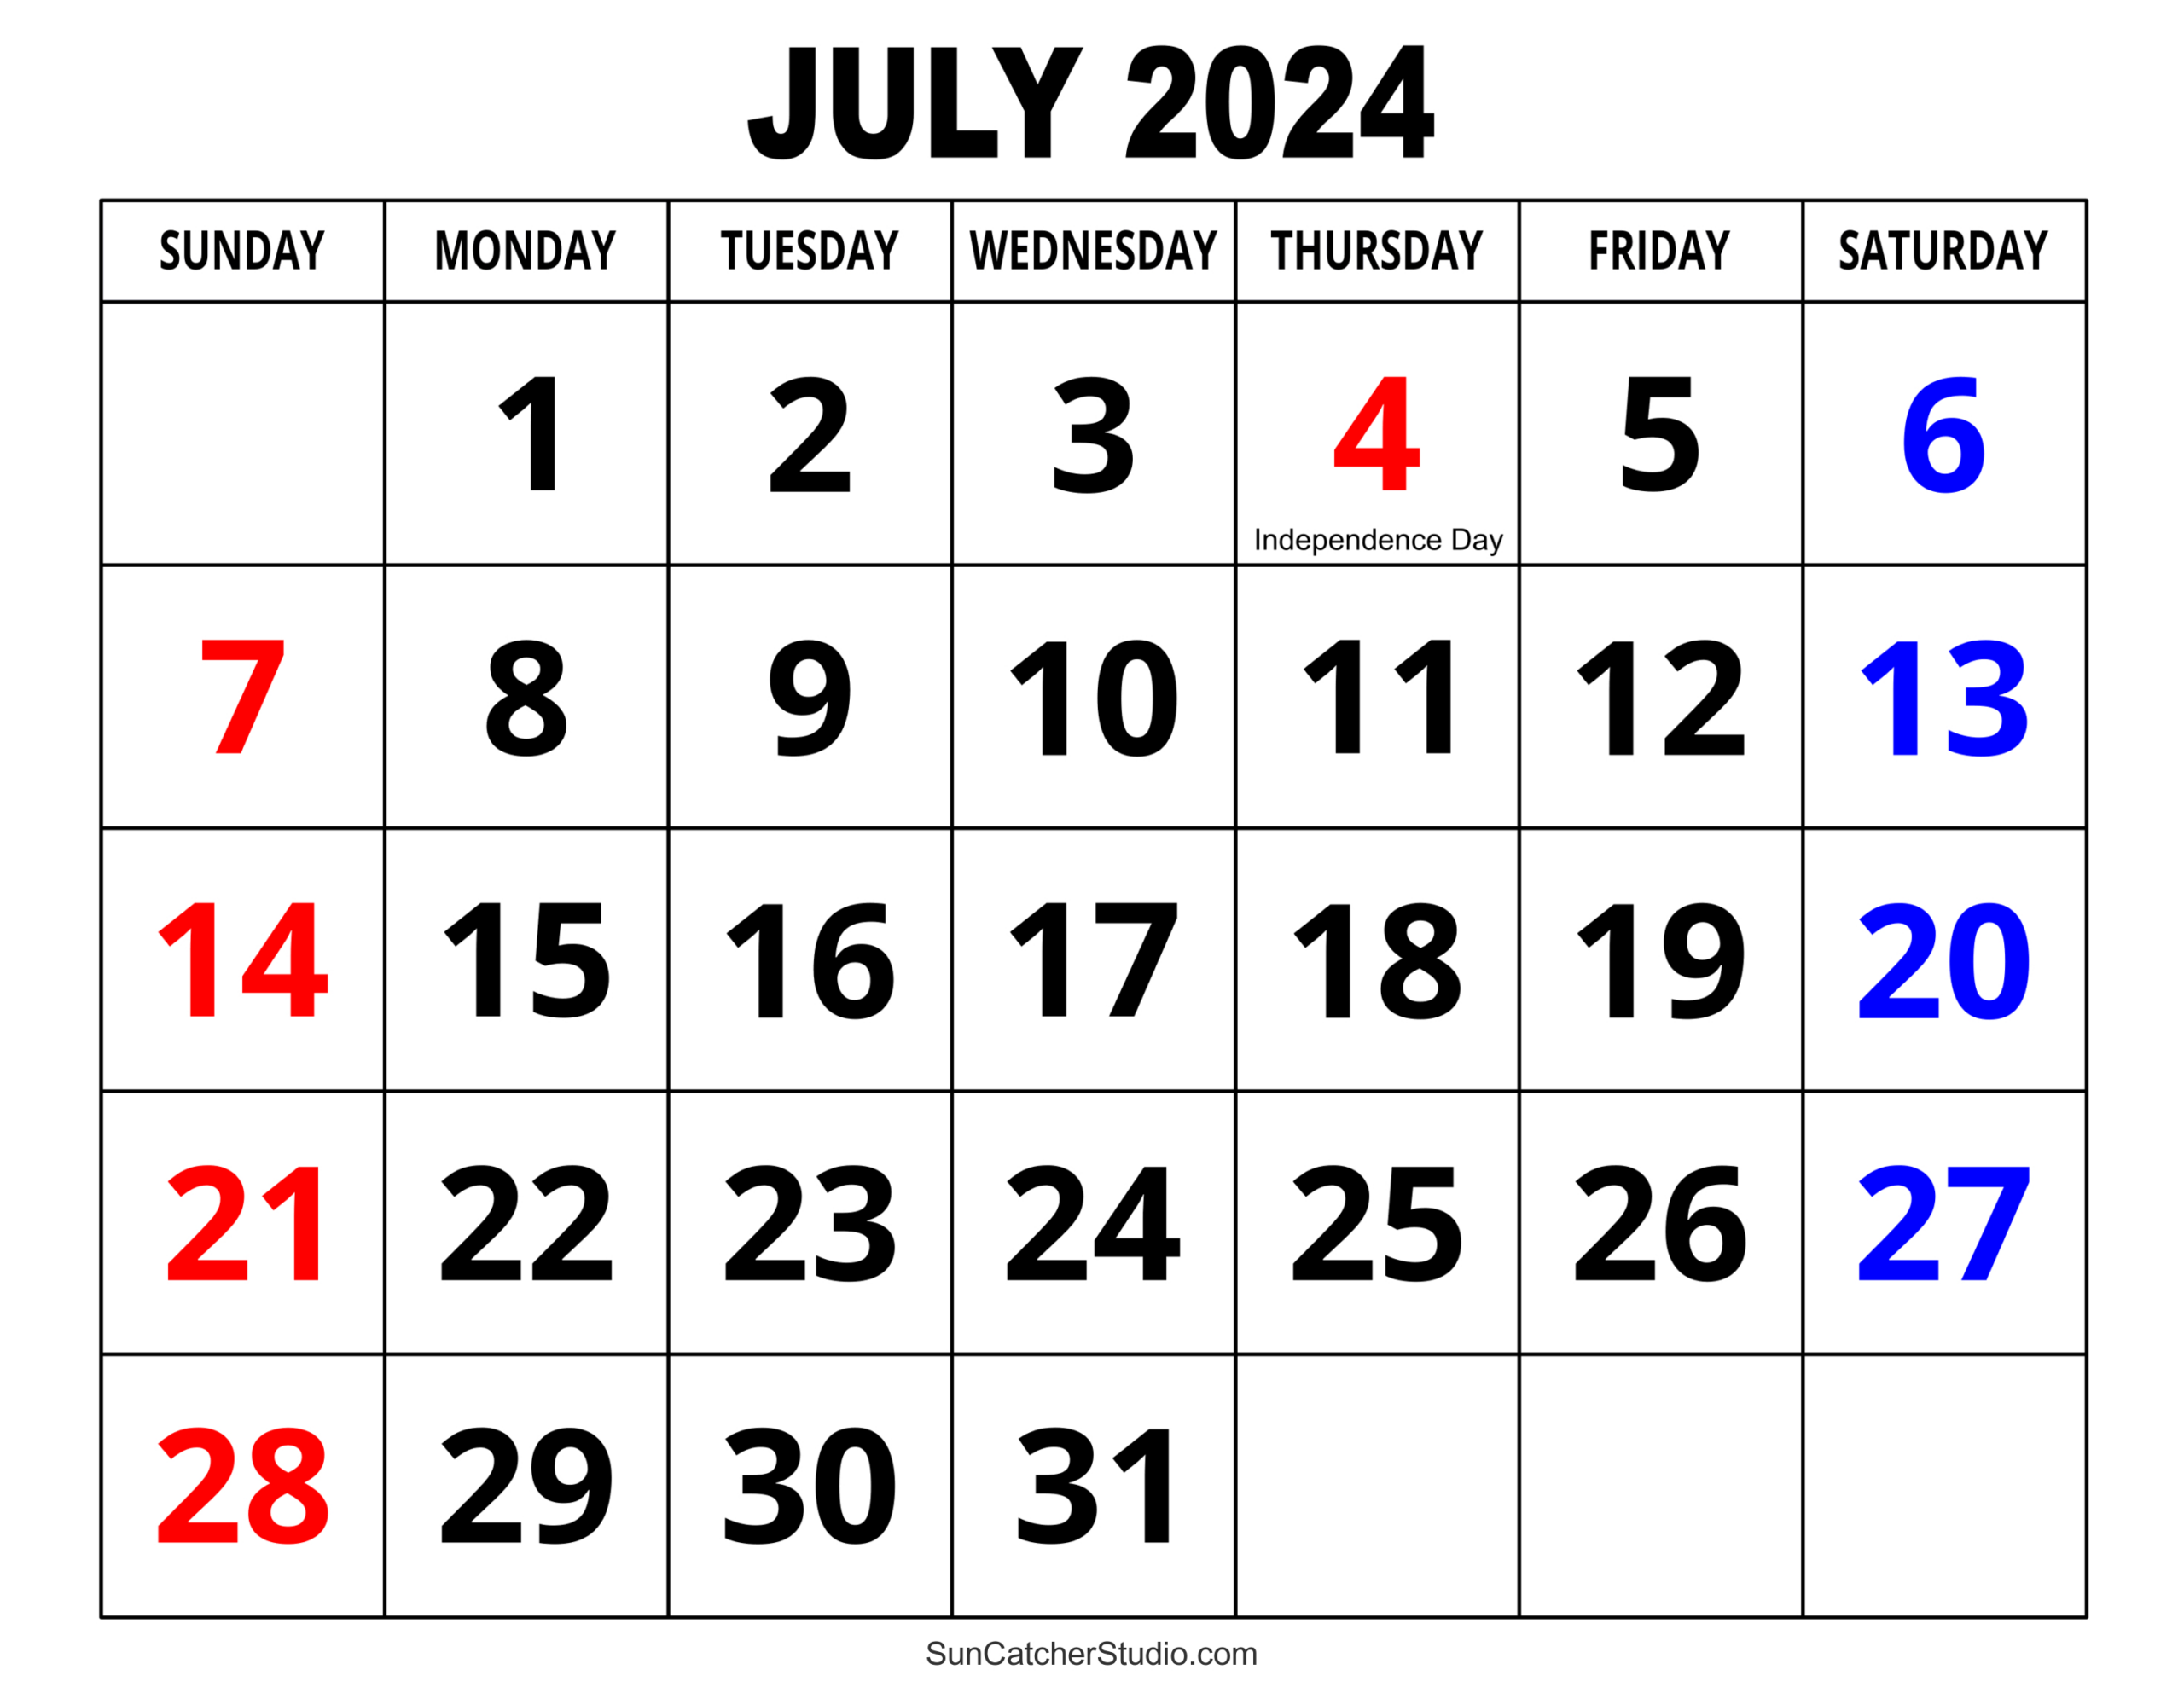 July 2024 Calendar (Free Printable) – Diy Projects, Patterns | 8 July 2024 Calendar Printable